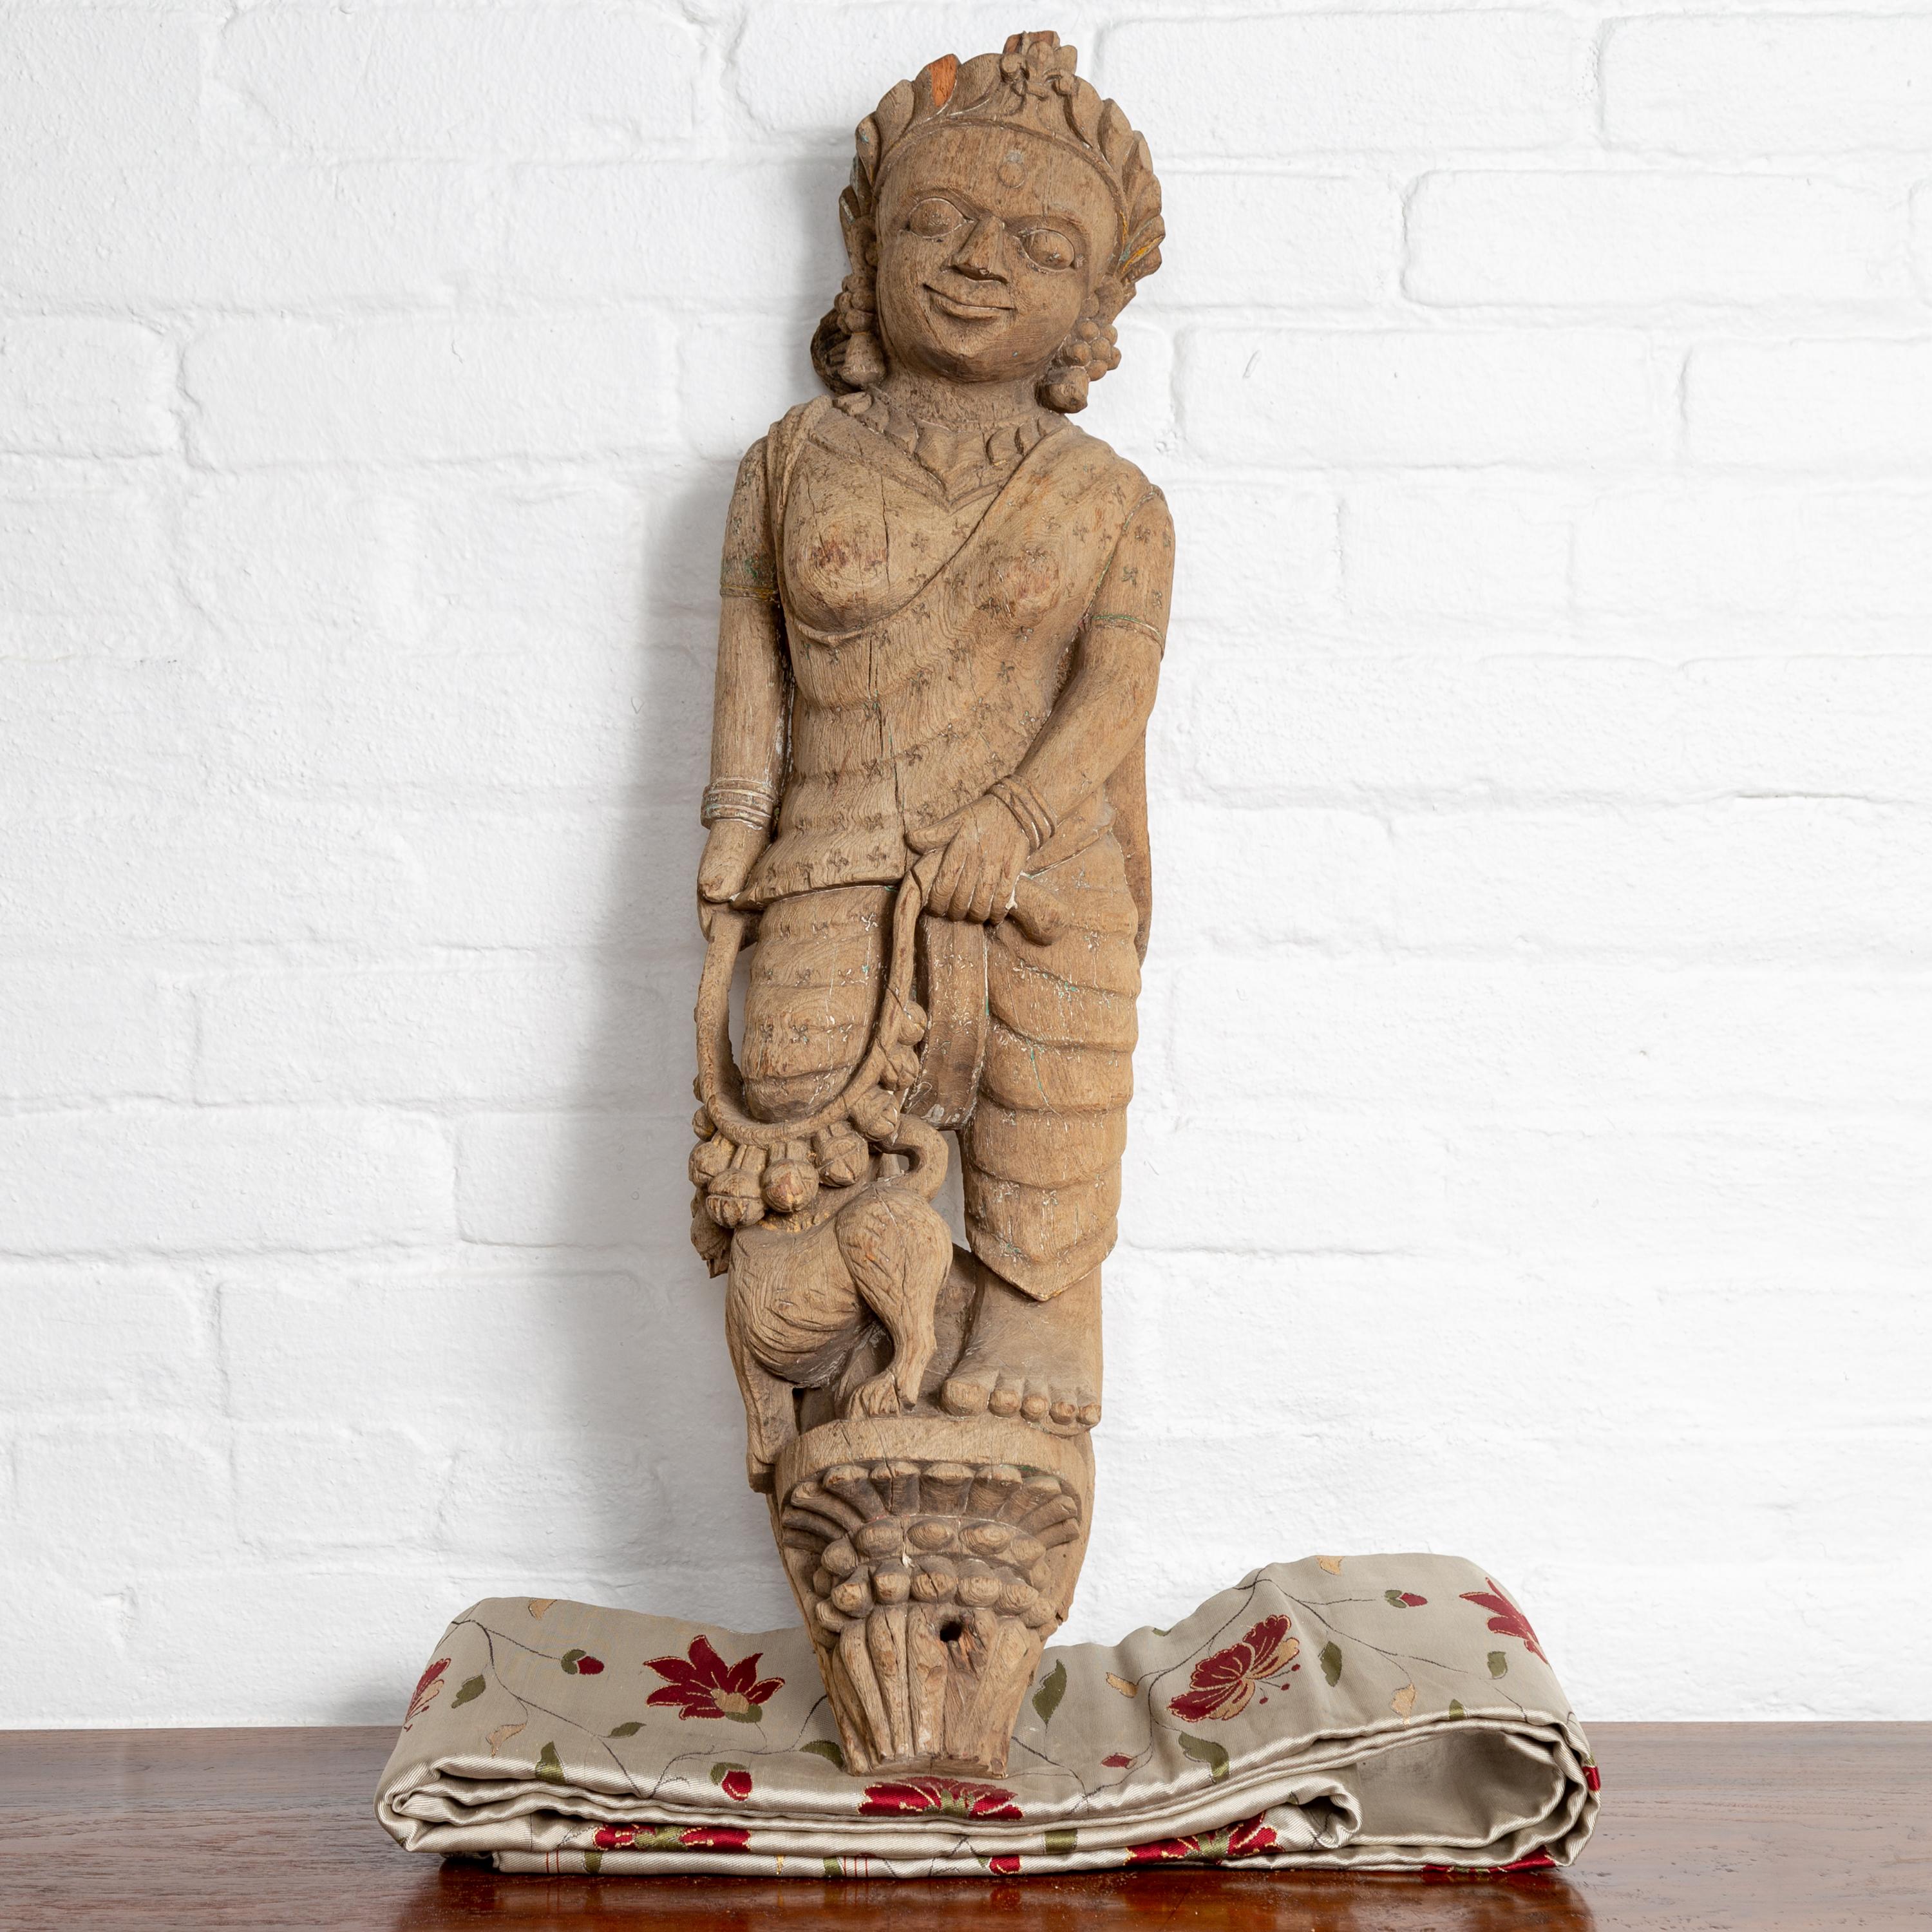 An Indian early 20th century hand carved architectural temple carving from Gujarat, depicting a woman and a feline. Born in the Western portion of India in the state of Gujarat, this exquisite hand carved temple sculpture features a woman and her